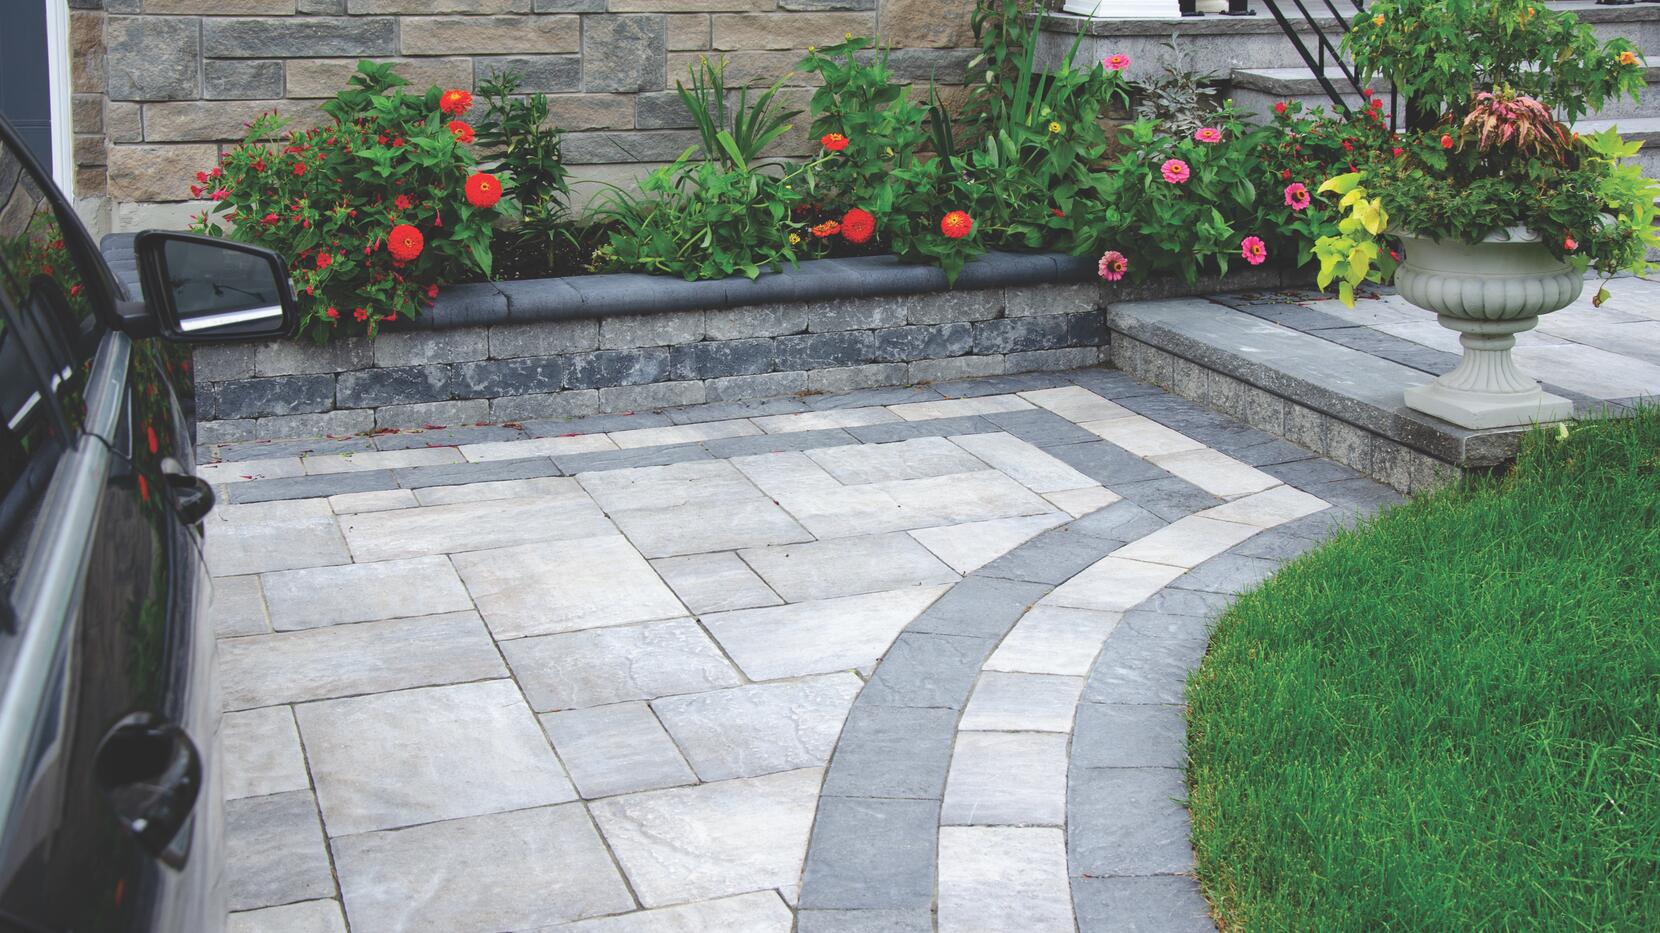 Pavers: Villanova, Champagne with Onyx border Garden Wall: Castlerok 2, Greystone with Onyx accent band and Cassina, Onyx coping